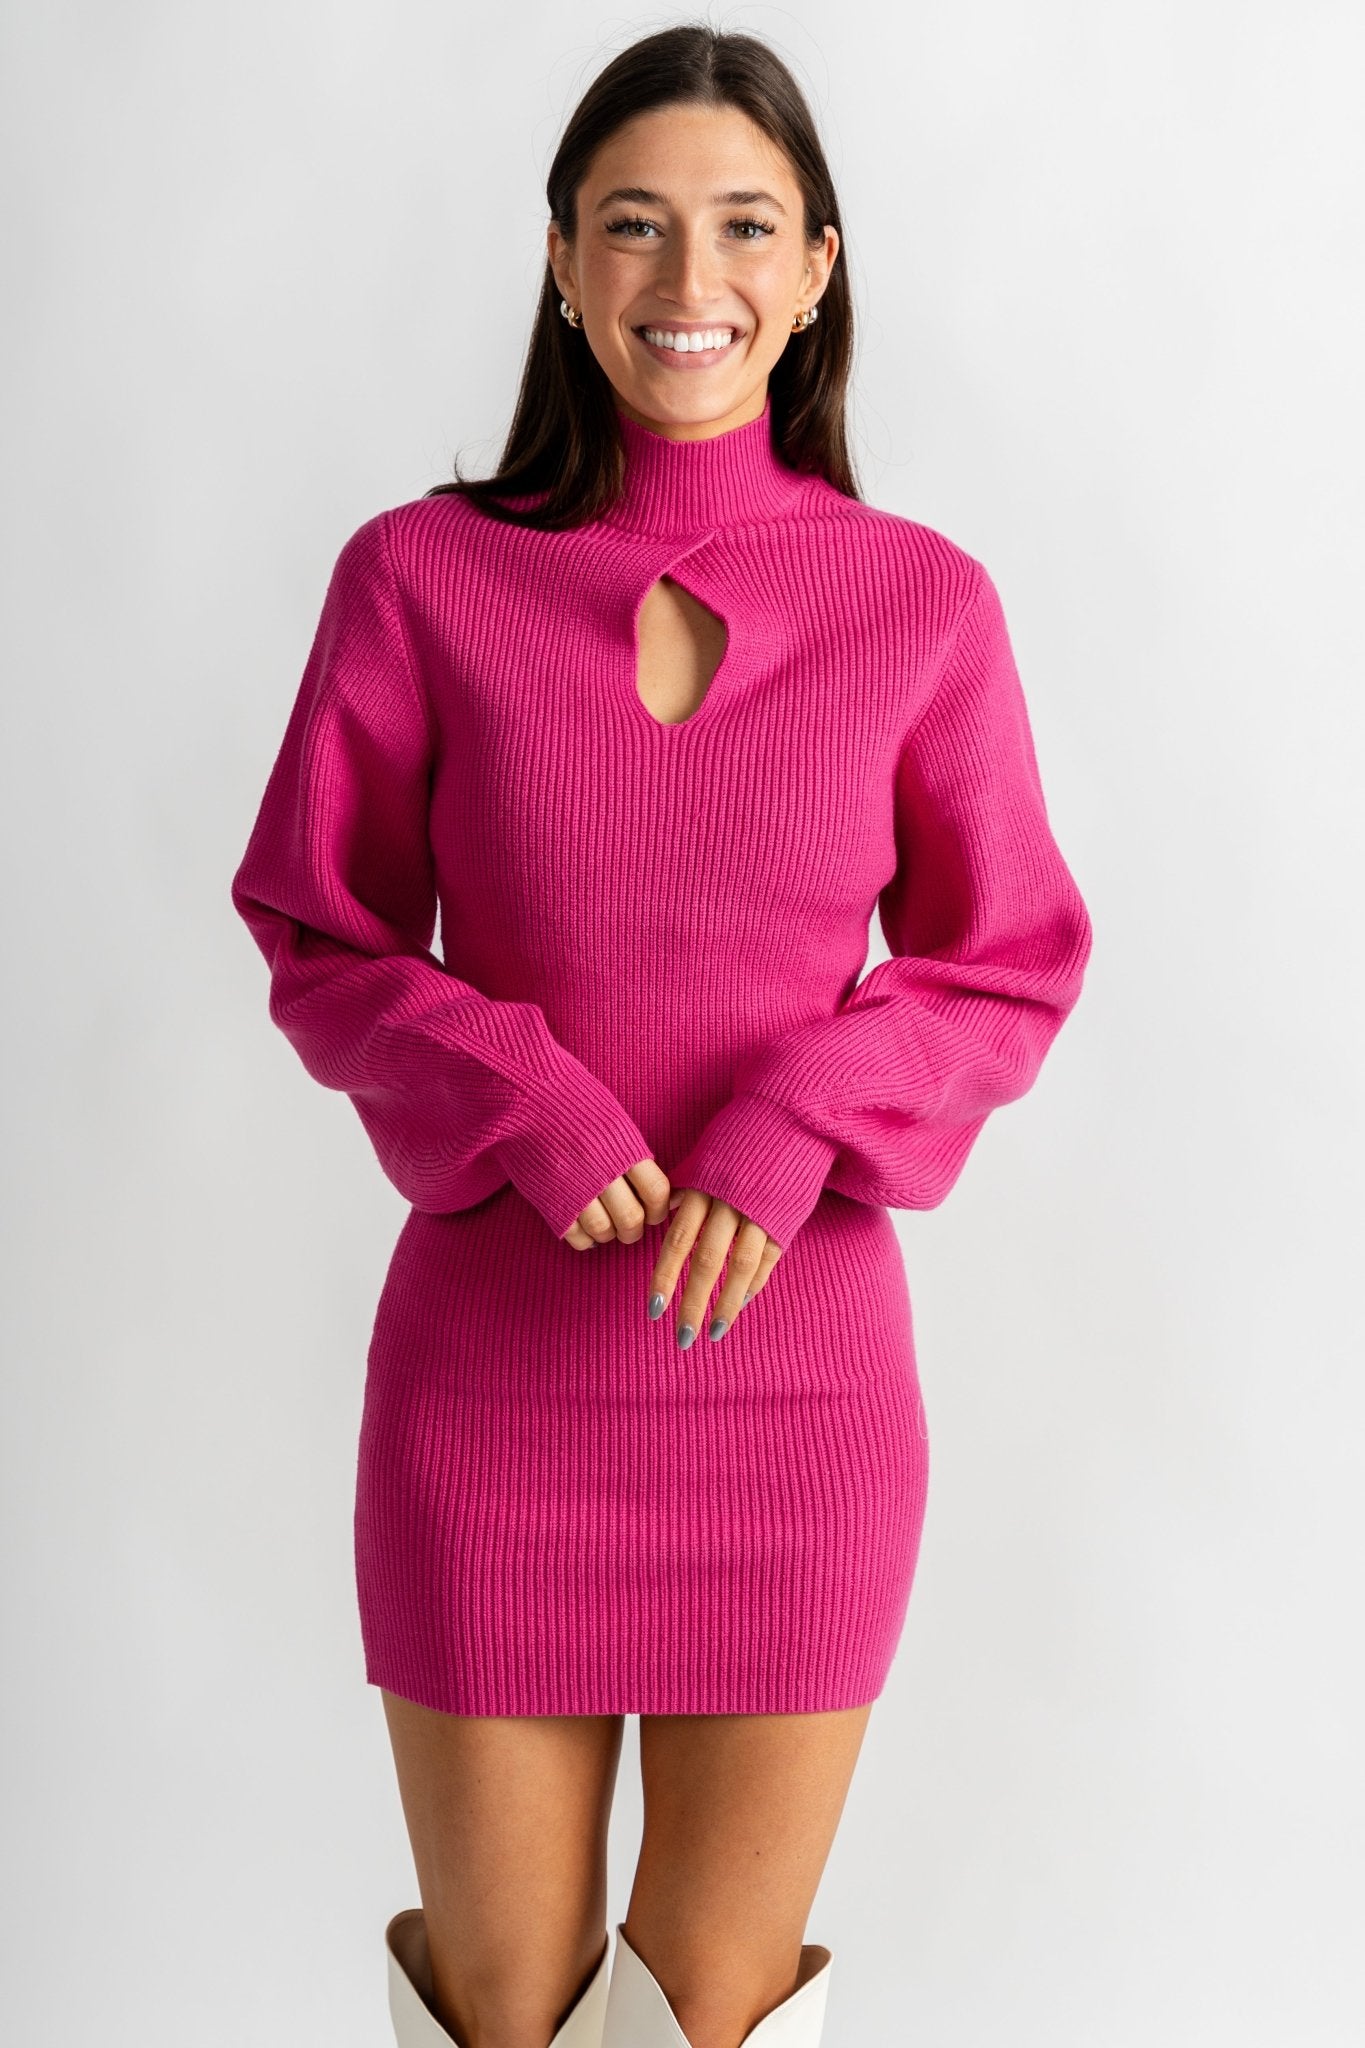 High neck mini dress magenta pink - Cute Valentine's Day Outfits at Lush Fashion Lounge Boutique in Oklahoma City